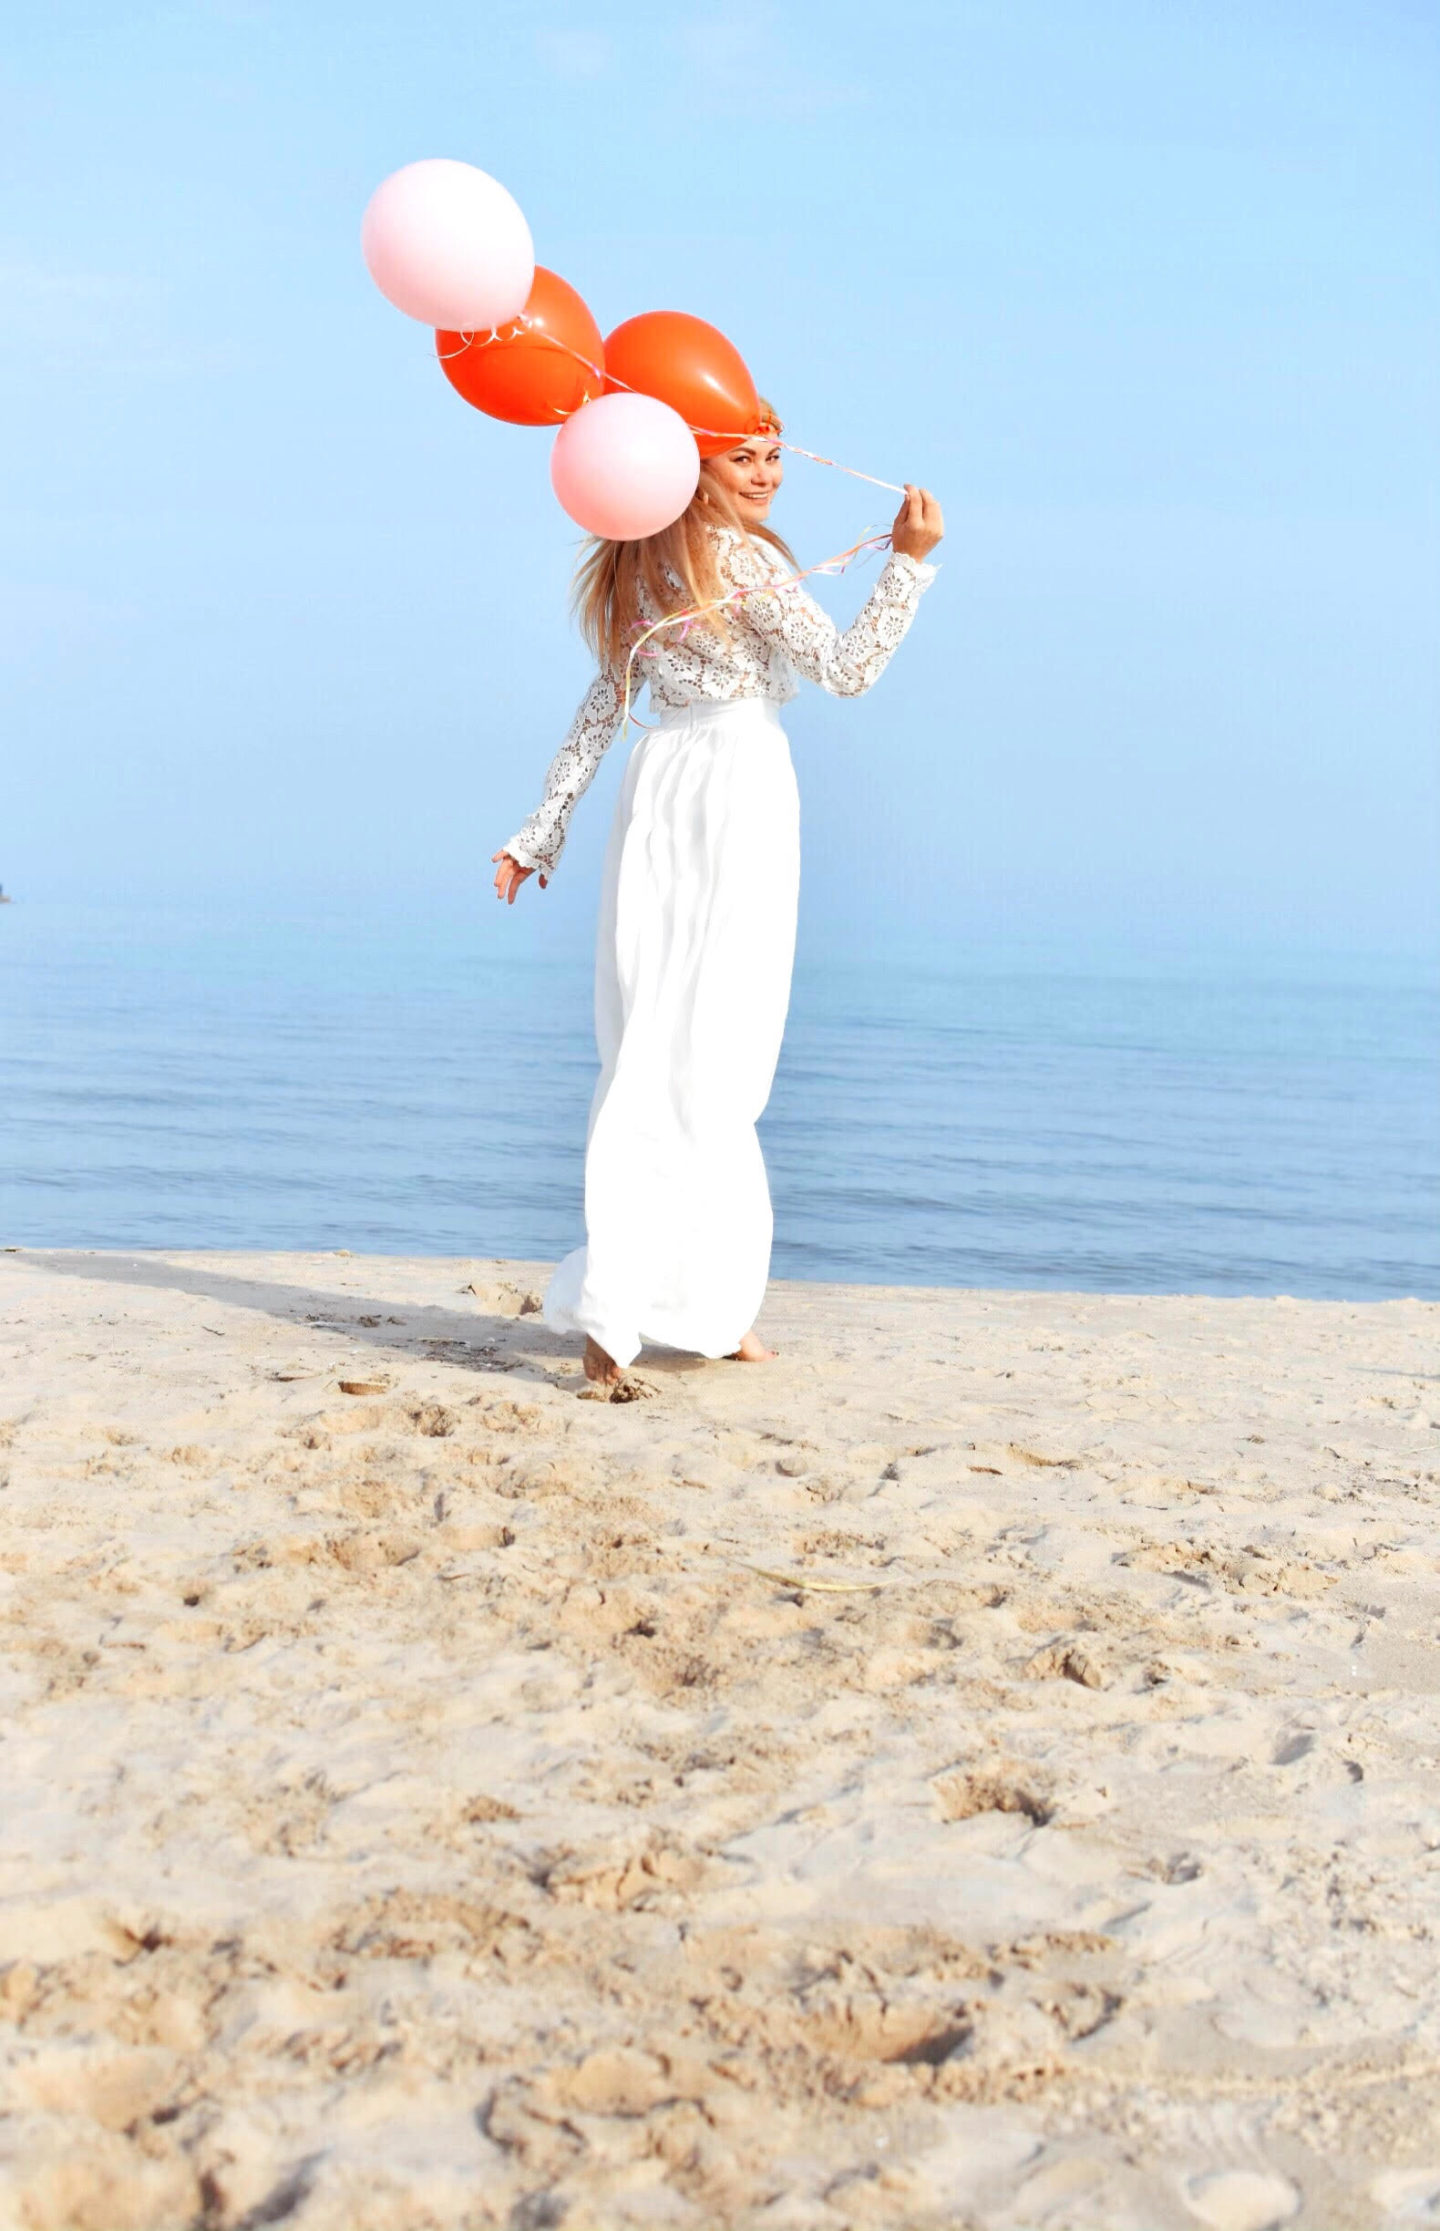 5th-Blogiversary-lessons-learned-vanessa-lambert-beach-balloons-whatwhatwouldvwear